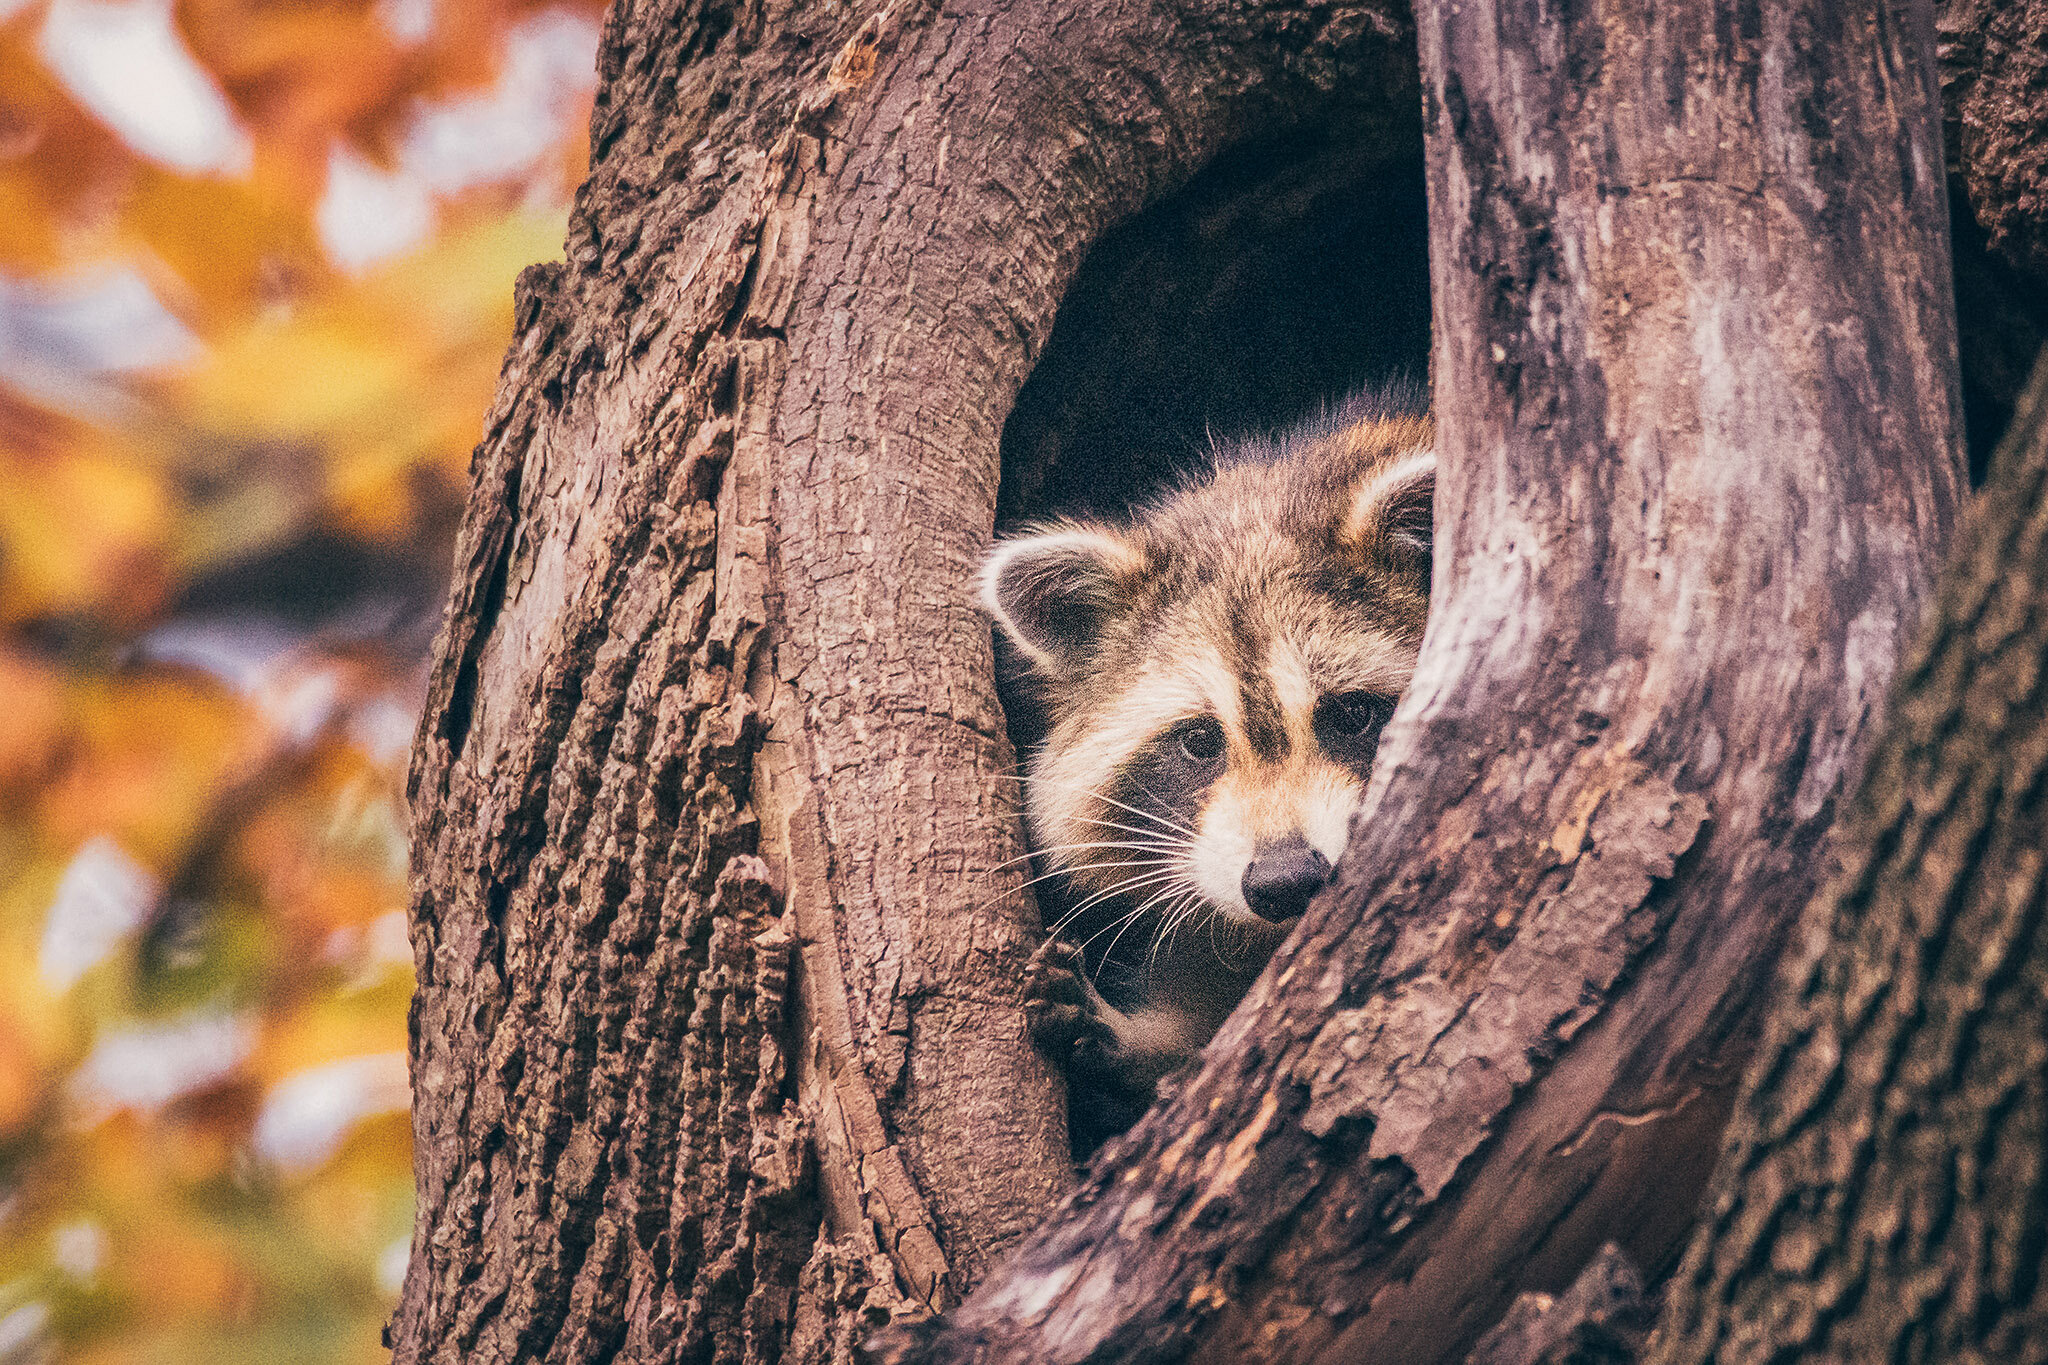 Fall is time for naps in tree holes. Am I right? Also those little fingers. So cute. 

*******************************************​​​​​​​​​​​​​​​​​​​​​​​​​​​​​​​​​​​​​​​​​​​​​​​​​​​​​​​​​​​​​​​​​​​​​​​​​​​​​​​​​​​​​​​​​​​​​​​​​​​​​​​​​​​​​​​​​​​​​​​​